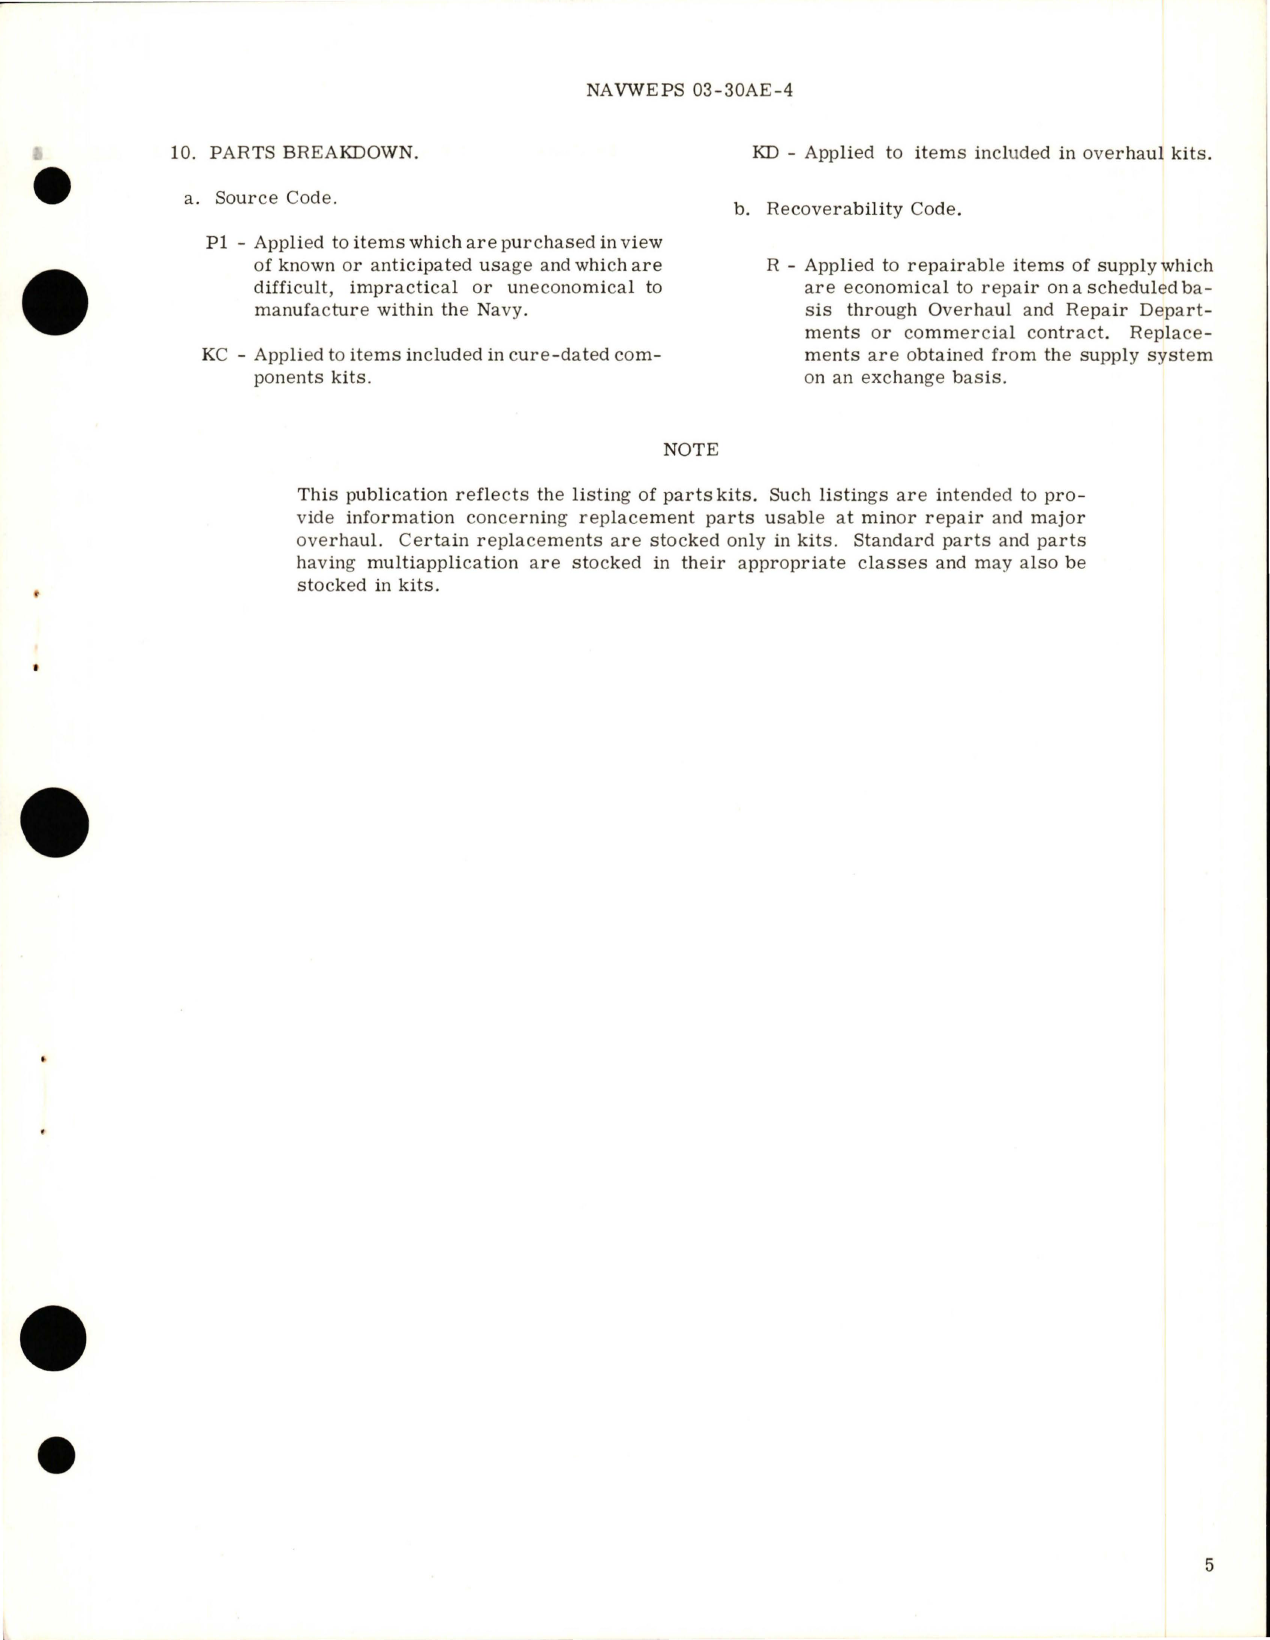 Sample page 5 from AirCorps Library document: Overhaul Instructions with Parts Breakdown for Pneumatic Pressure-Operated Control Valve - Part A70093